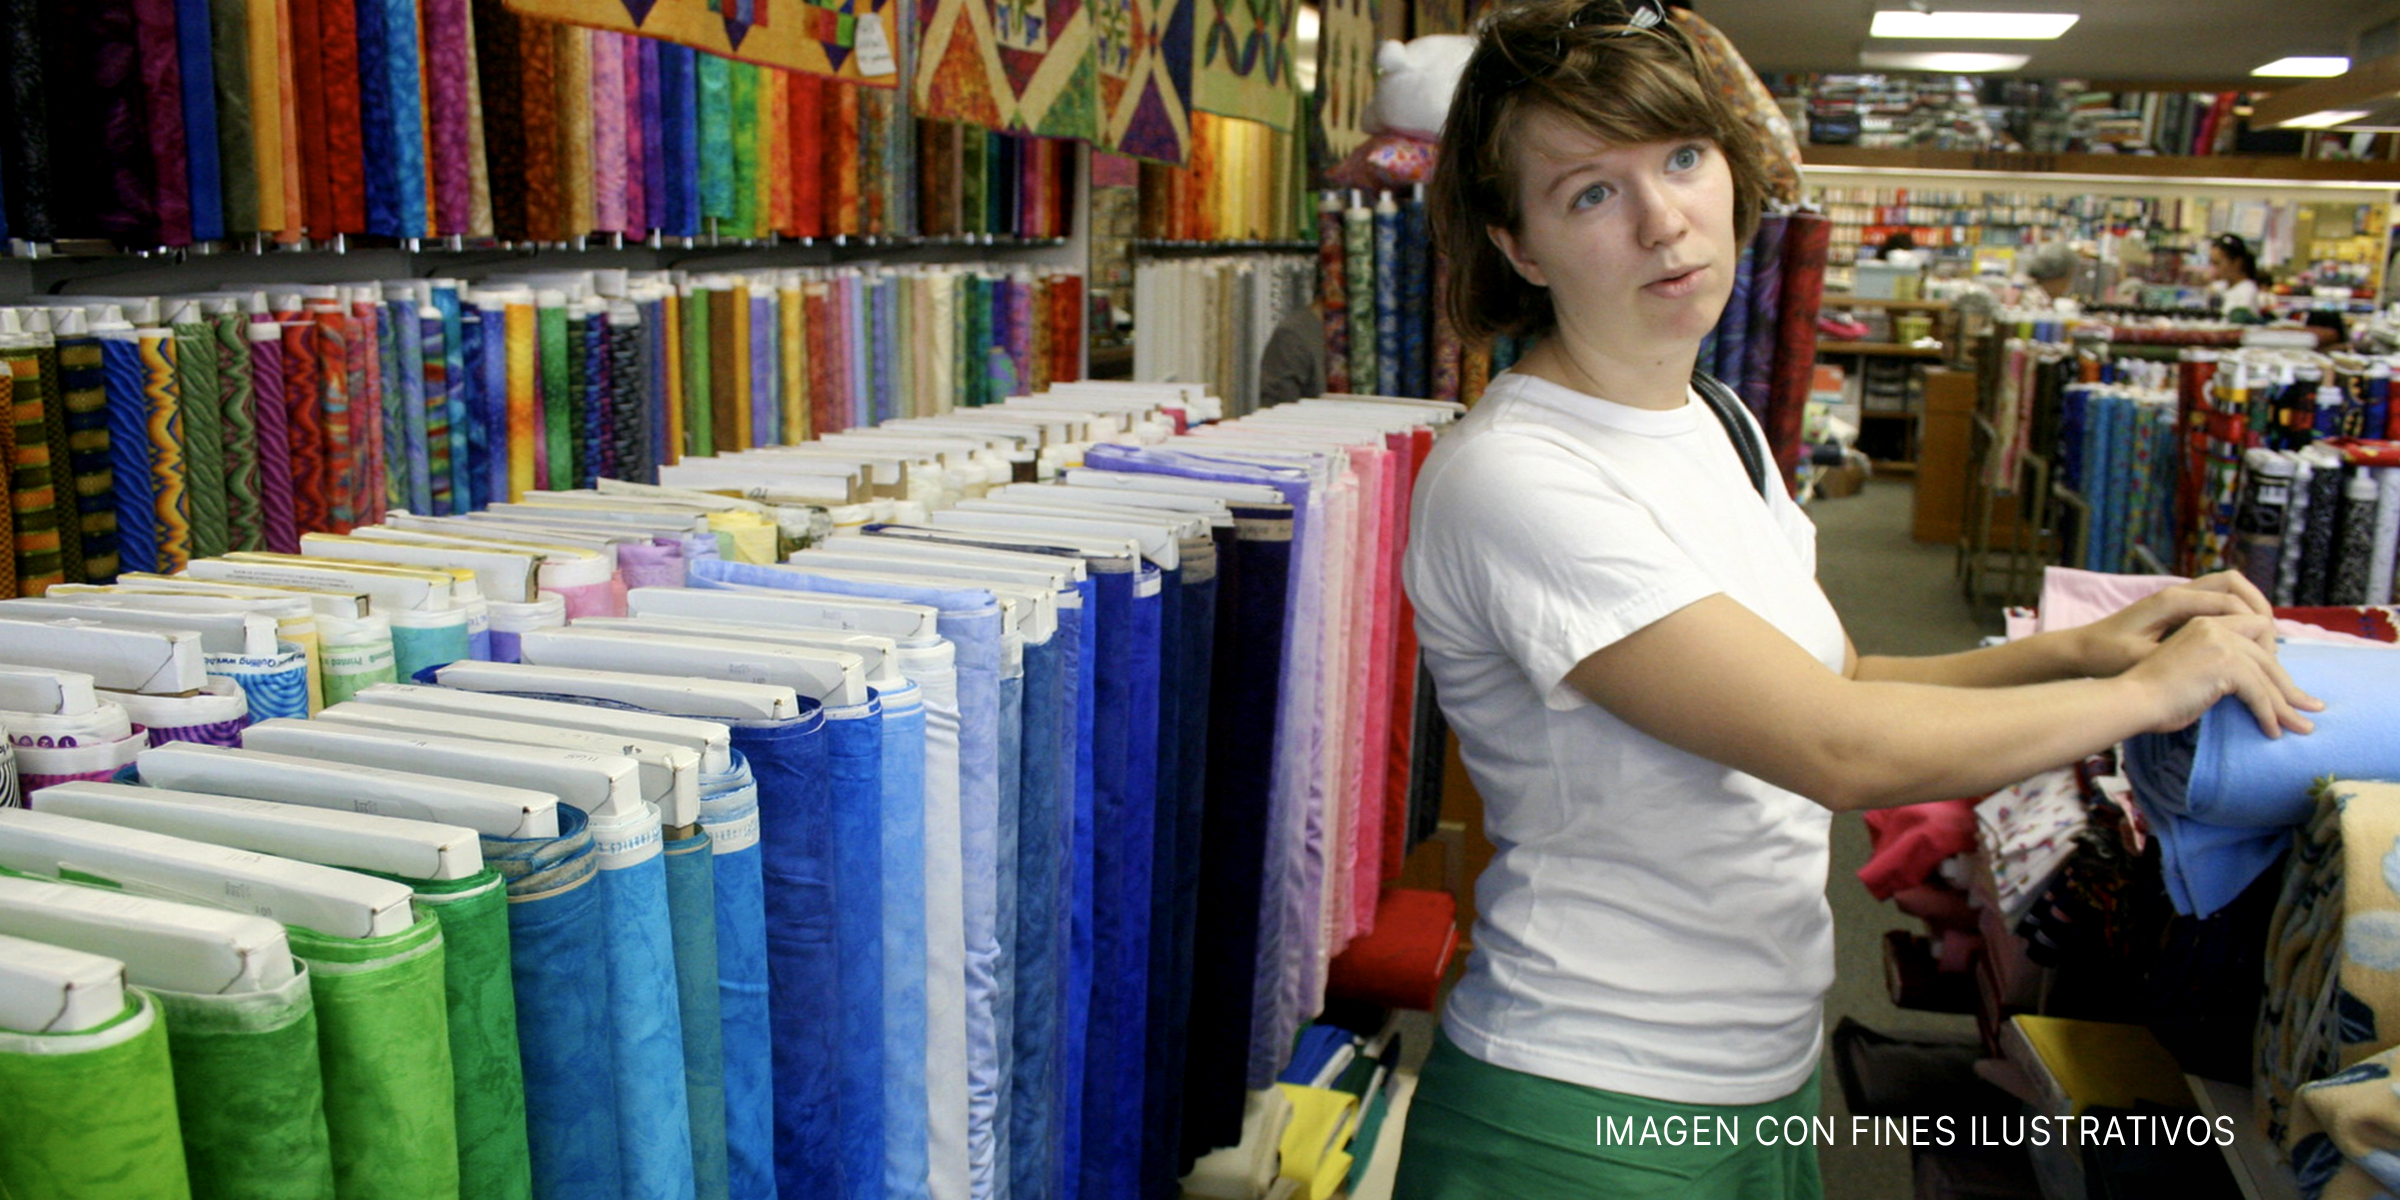 A woman in a material store | Source: Flickr